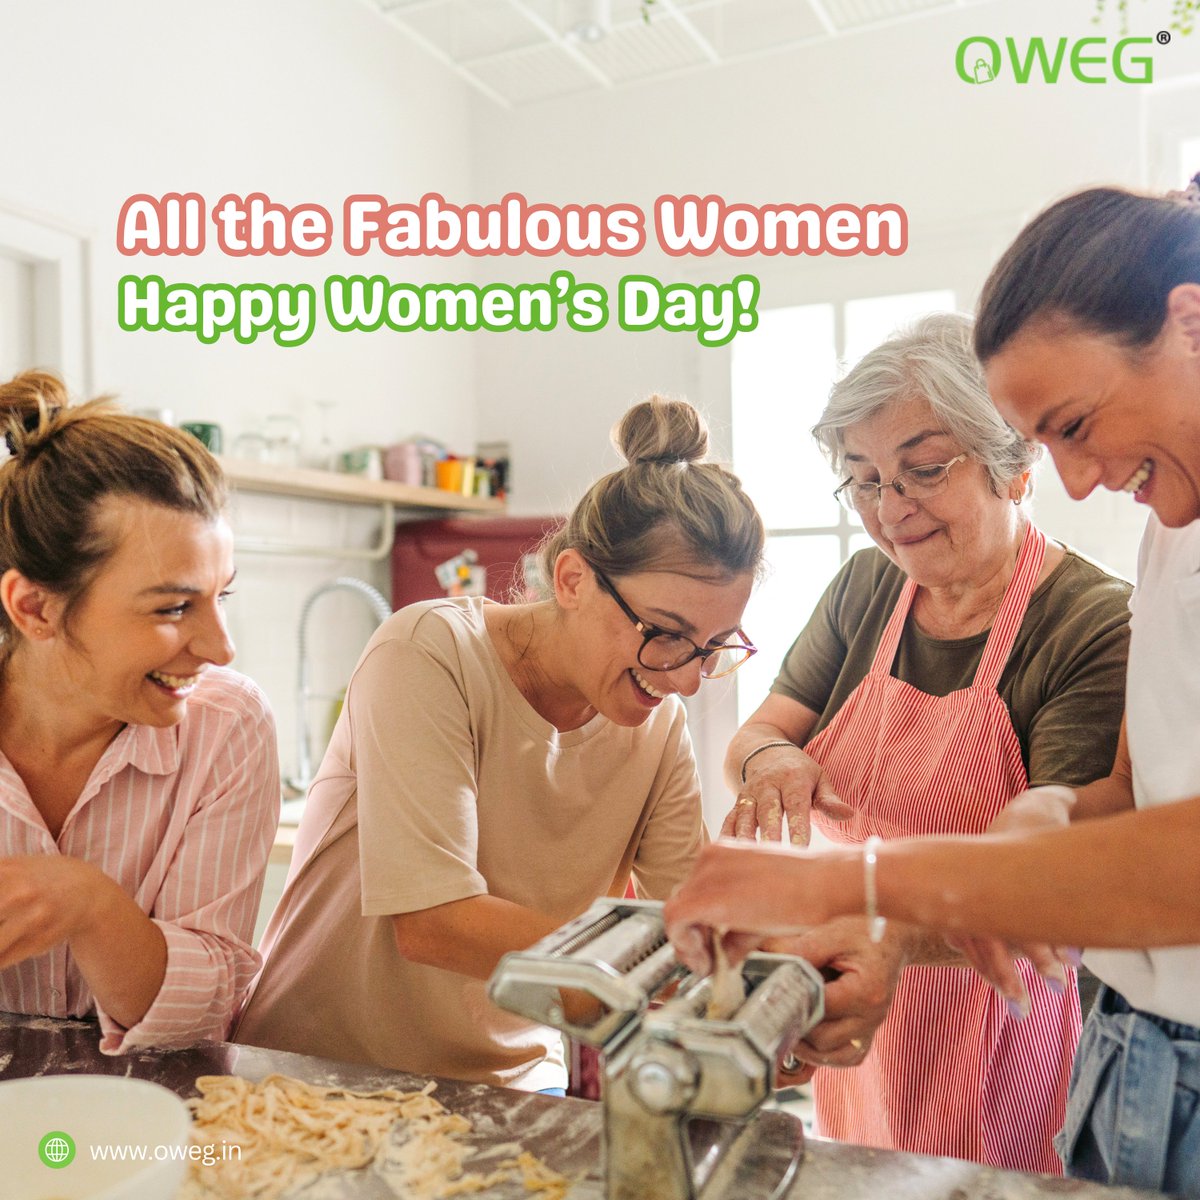 Here's to fierce women who redefine what's possible. Cheers! Happy Women's day!

Check out the deal's at :- oweg.in
.
.
#oweg #womensday #fabulousfemales #empowerment #strengthinunity #brilliantwomen #inspiration #beautyandpower #strongwomen #rolemodels